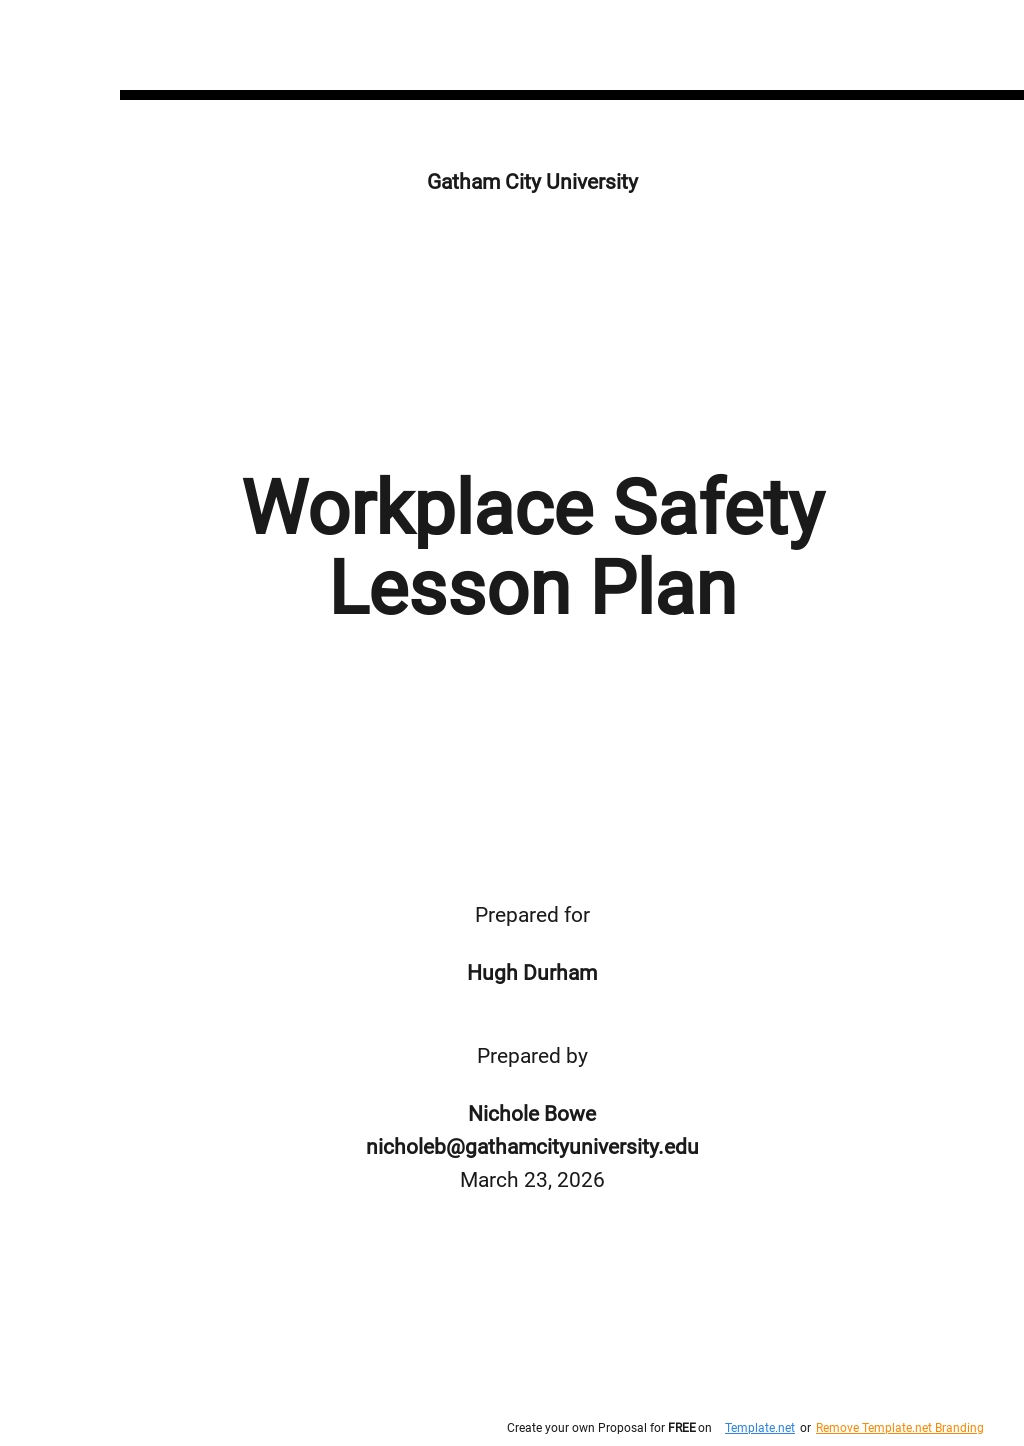 Workplace Safety Lesson Plan Template.jpe